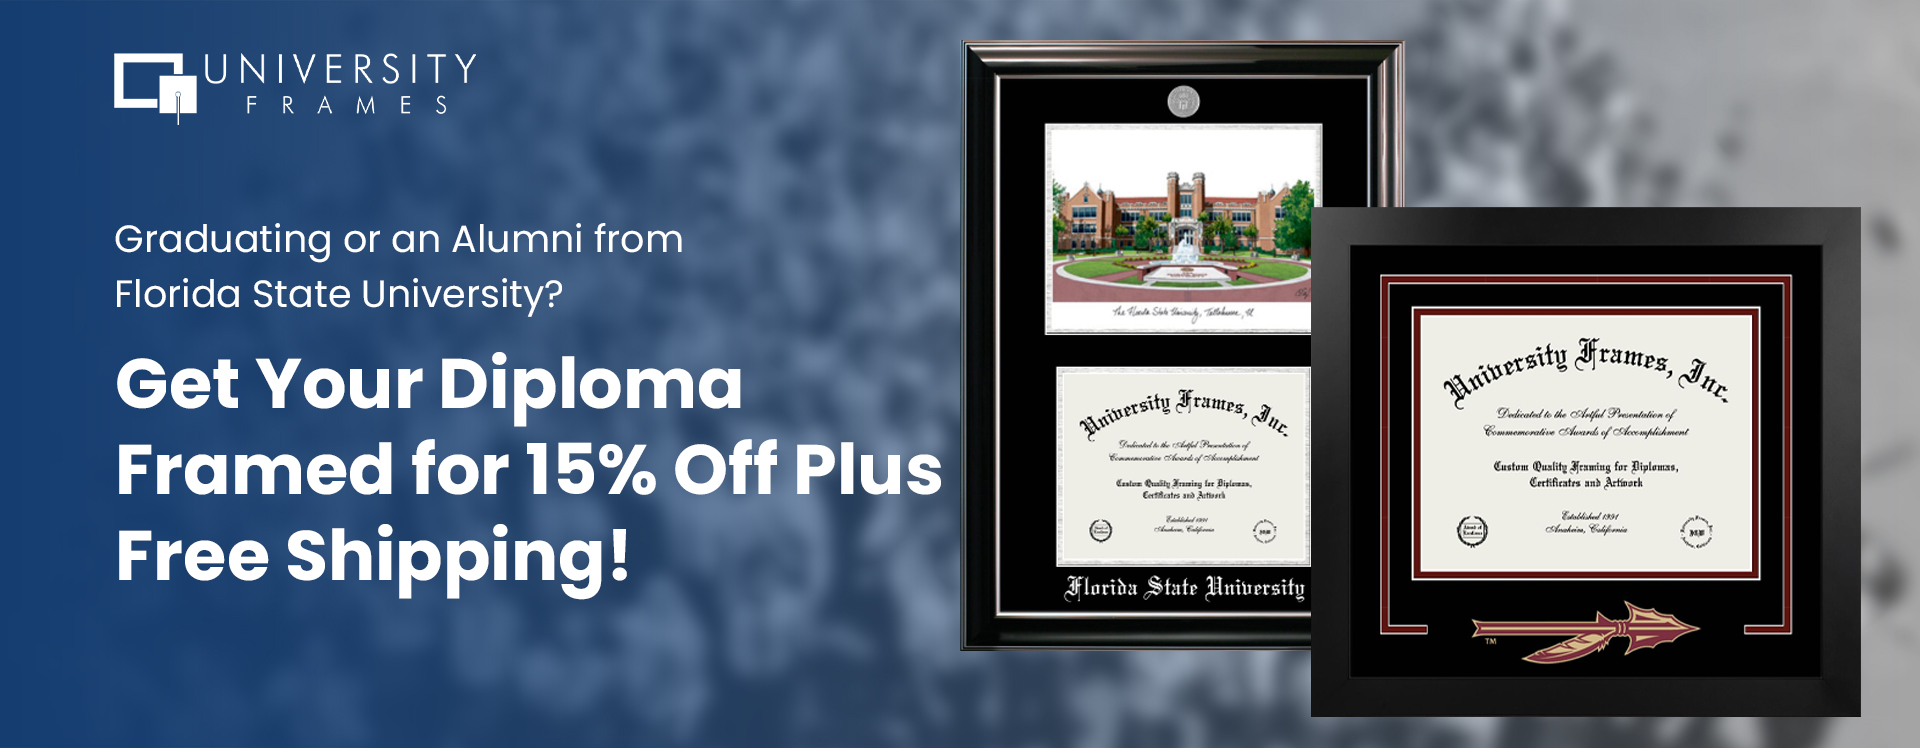 Graduating or an Alumni from Florida State University? Get Your Diploma Framed for 15% Off Plus Free Shipping!